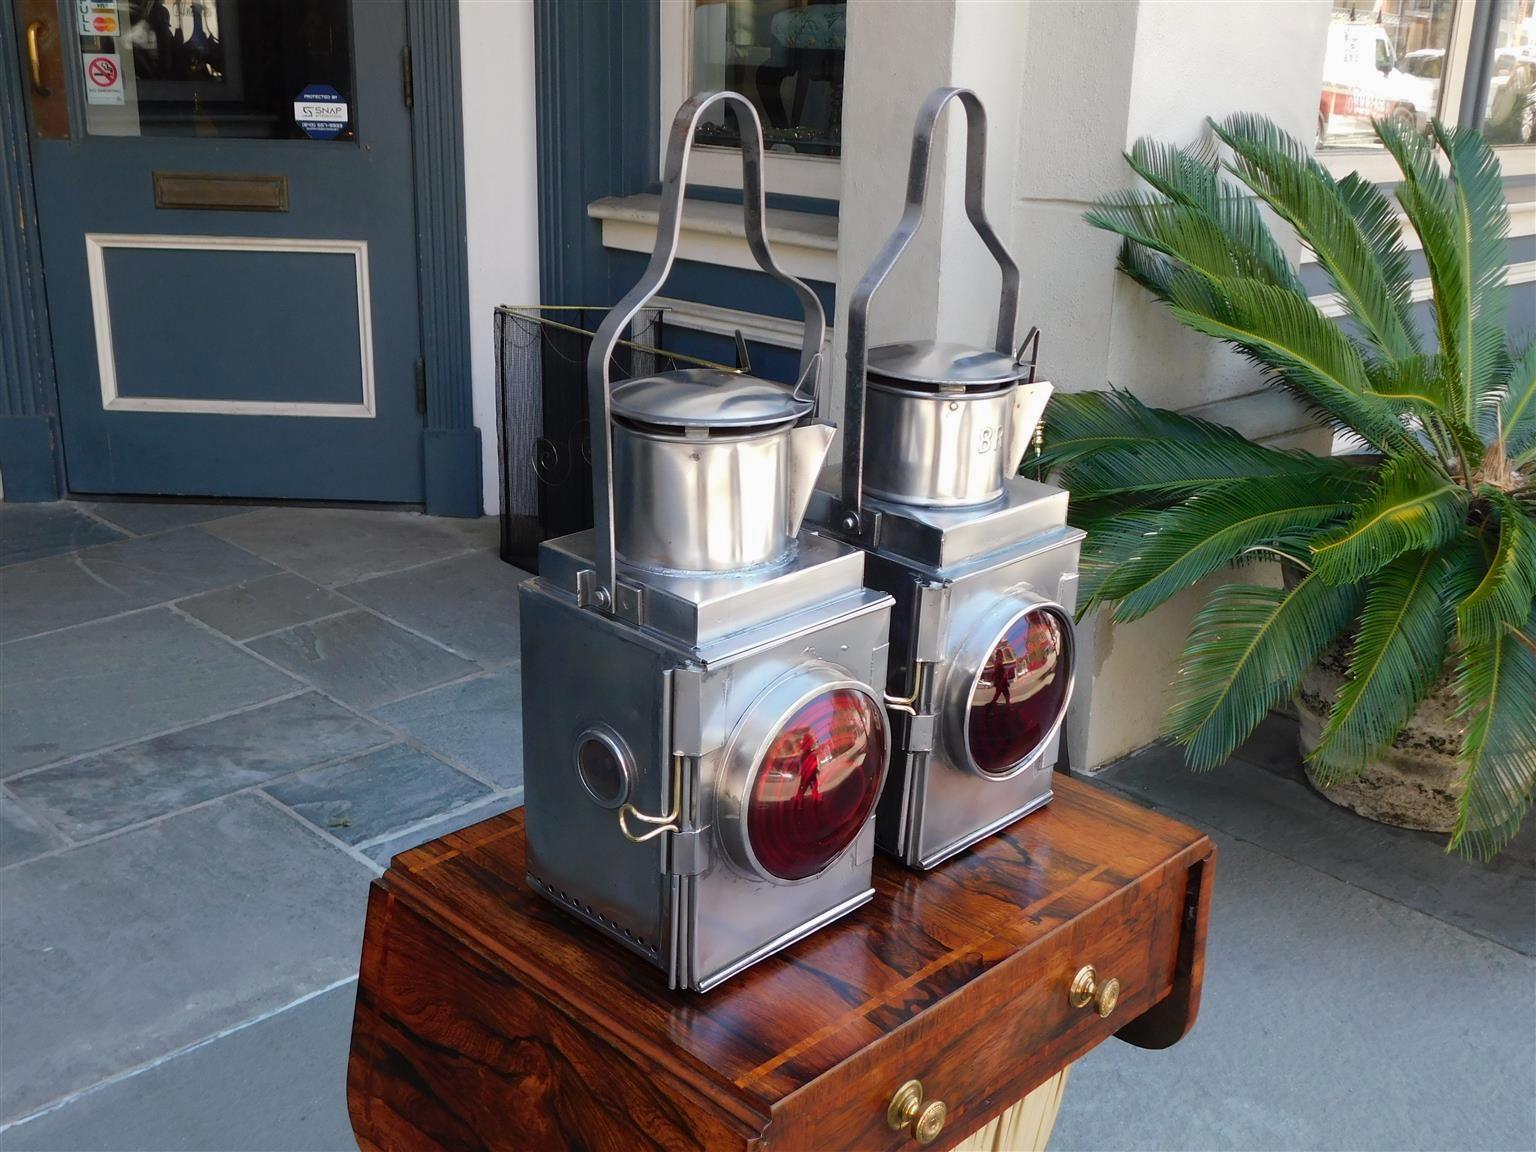 Pair of American polished steel railroad Signal lanterns with flanking hinged doors, scrolled carrying handles, vented tops, rear mounting brackets, and the original Fresnel circular red lenses. Originally oil and can be electrified if desired. Late